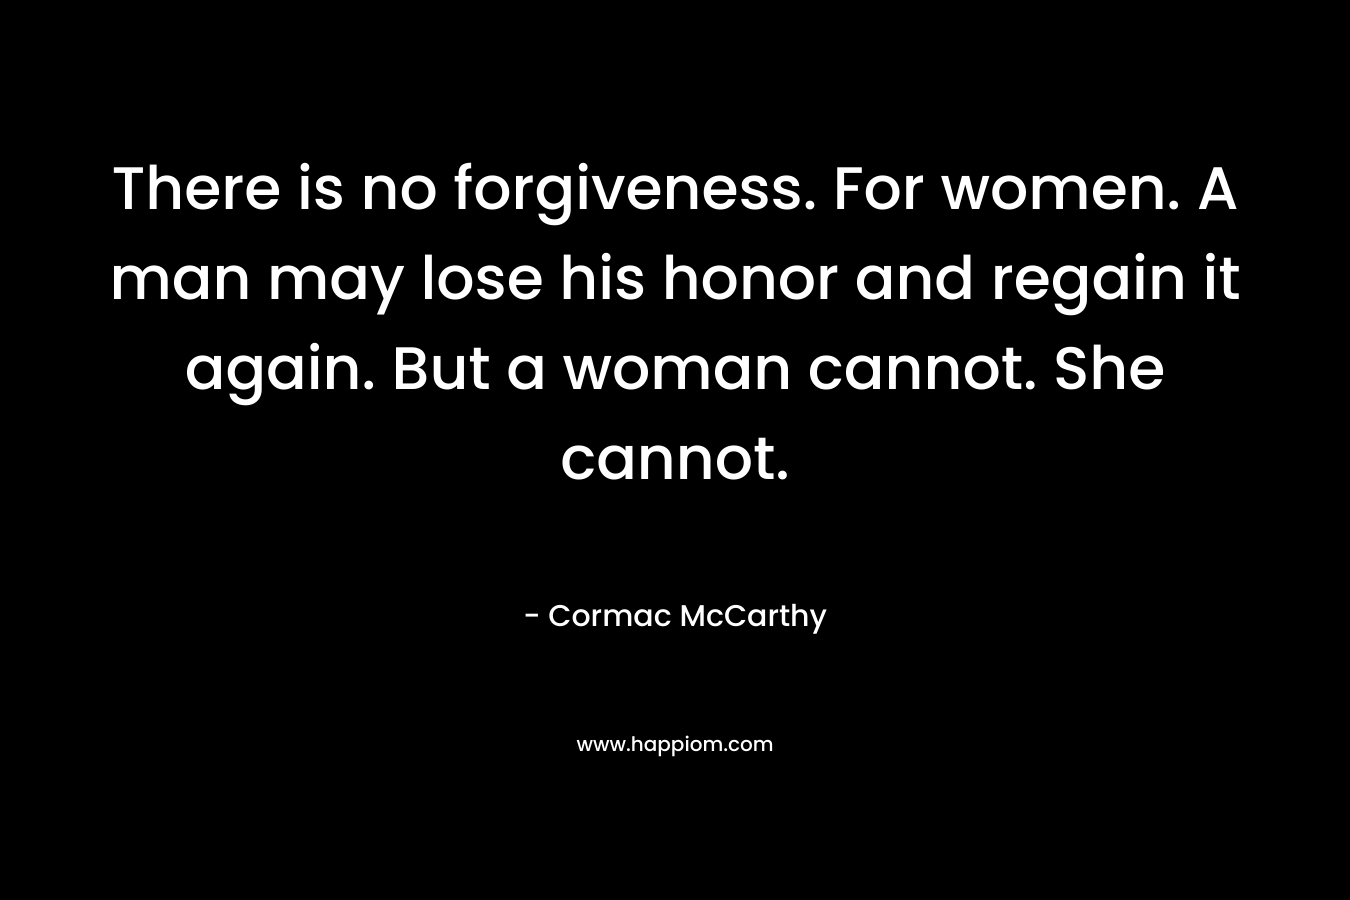 There is no forgiveness. For women. A man may lose his honor and regain it again. But a woman cannot. She cannot. – Cormac McCarthy